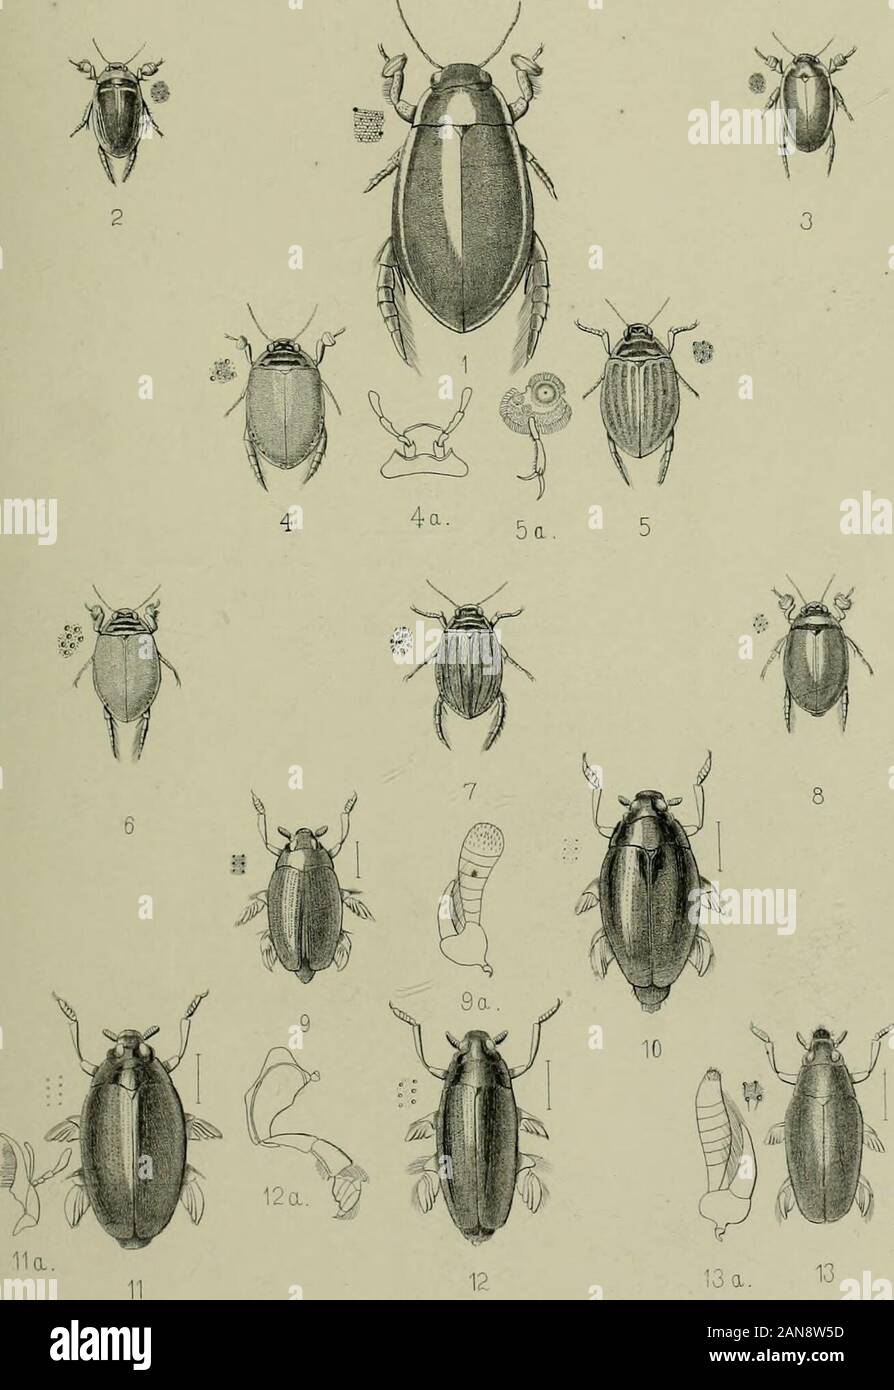 The Coleoptera of the British islandsA descriptive account of the families, genera, and species indigenous to Great Britain and Ireland, with notes as to localities, habitats, etc . ?13 a. 13 THE :AHB«ID6E SCItminC INSIBUMMT CCMPAftr-. L.REEVt S.CQ. LONDON PLATE XXXII. Fig. 1. Hydrophilus piceus, L. 2. Hytlrocharis caraboiiles, L, 3. Hytlrobius fuscipes, L. 4. „ „ var. 5. „ oblongus, Hcrhft. 6. Philhydrus testaceus, F. 7. „ maritimus, Thoms. 8. „ nigricans, Zett. 9. ,, coarctatus, GretU. 10. Cymbiodyta ovalis, Tho7n!&gt;. 11. Euocbrus bicolor, G^ll. 12. Anacaena globulus, Pai/I.-. 13. „ bipust Stock Photo